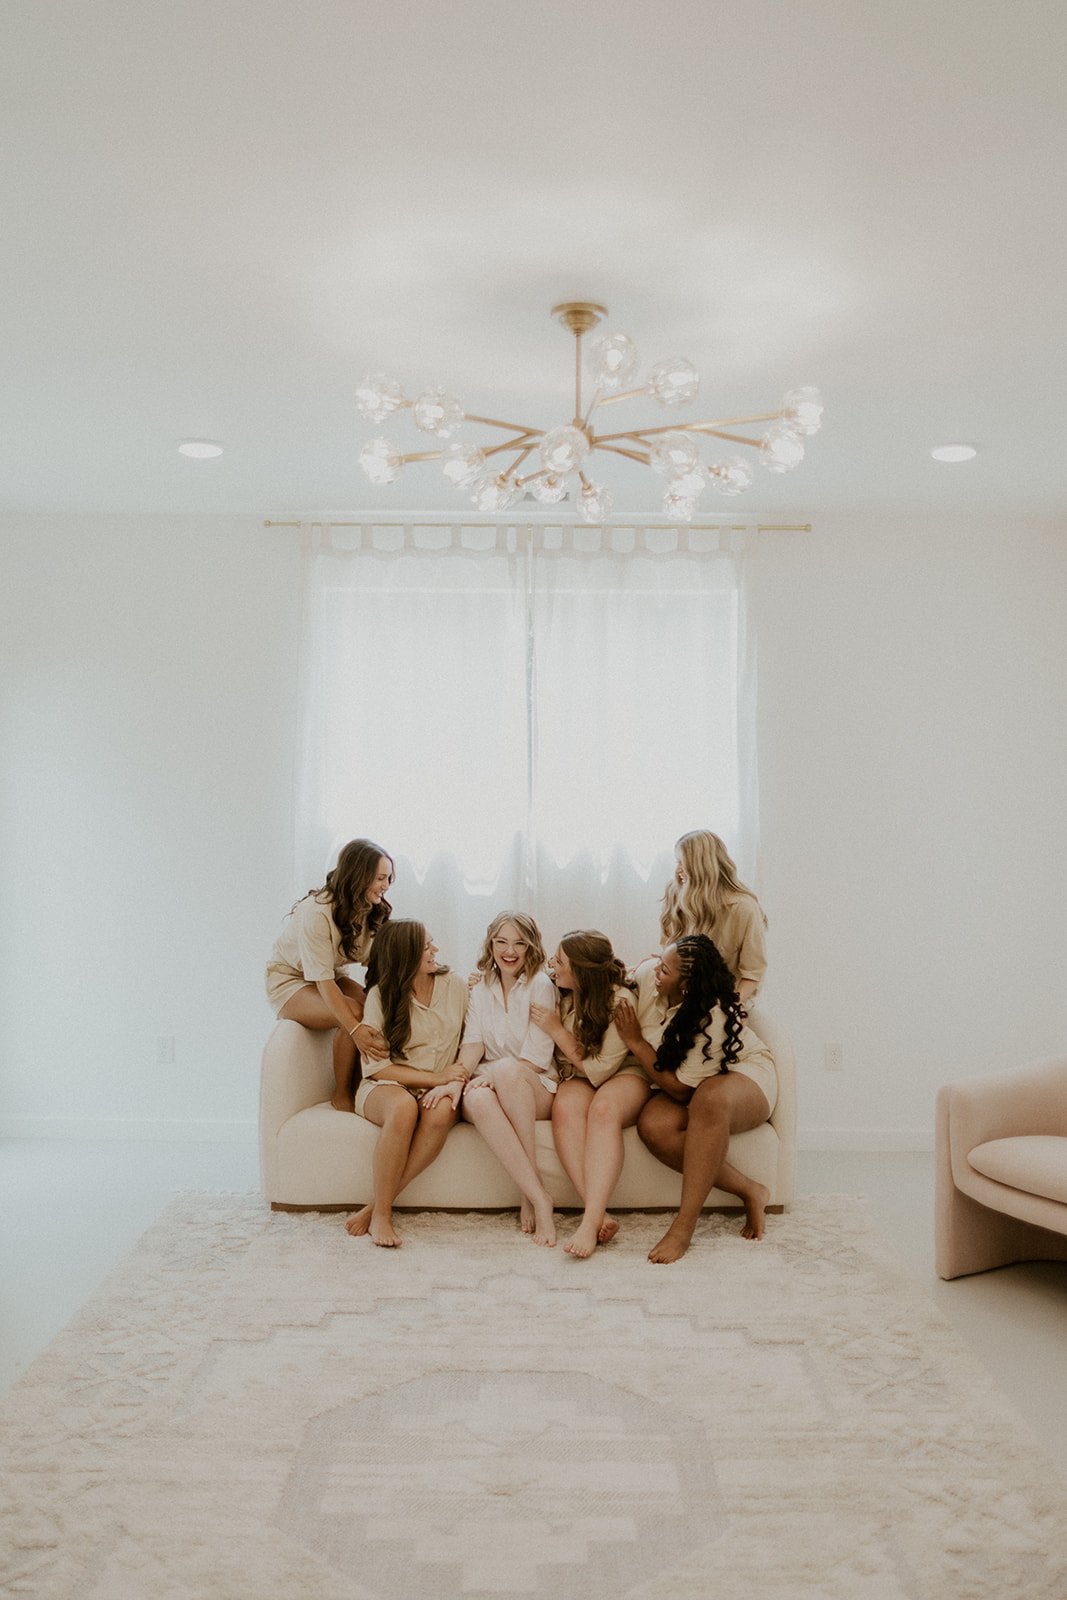 Bridesmaids posing together in the bridal suite. Sitting on the couch together laughing.